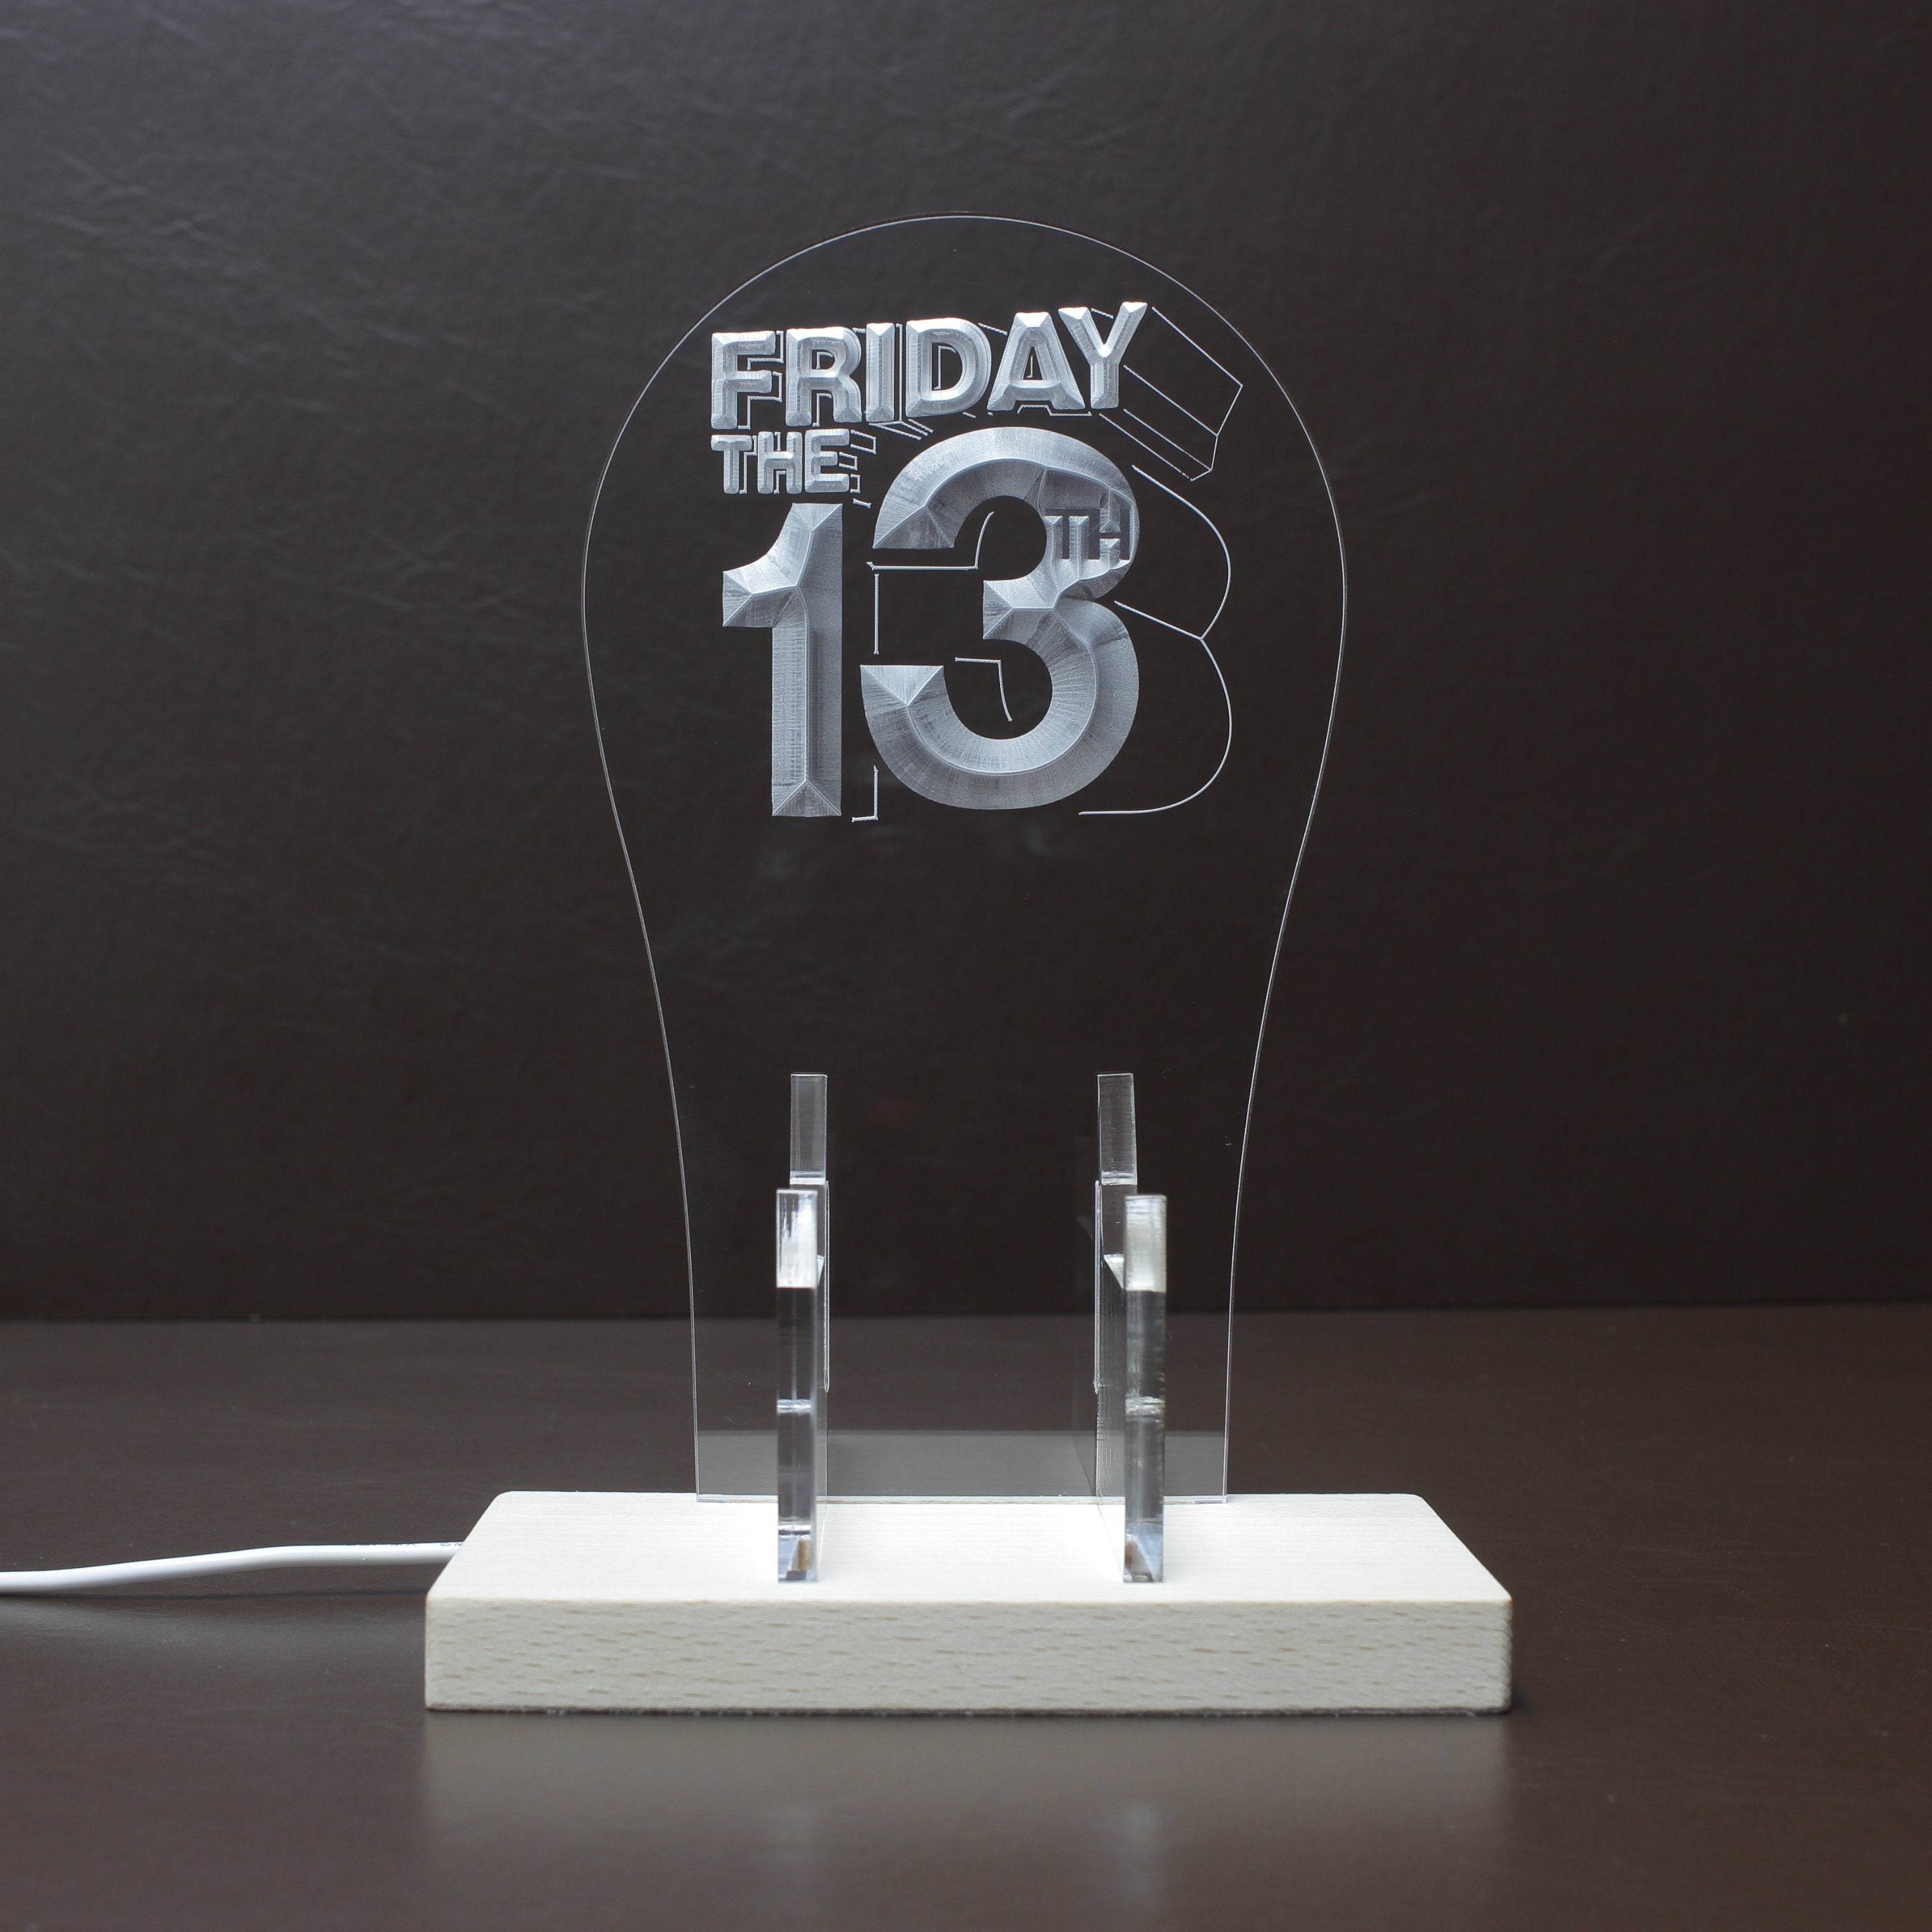 Friday 13th LED Gaming Headset Controller Stand